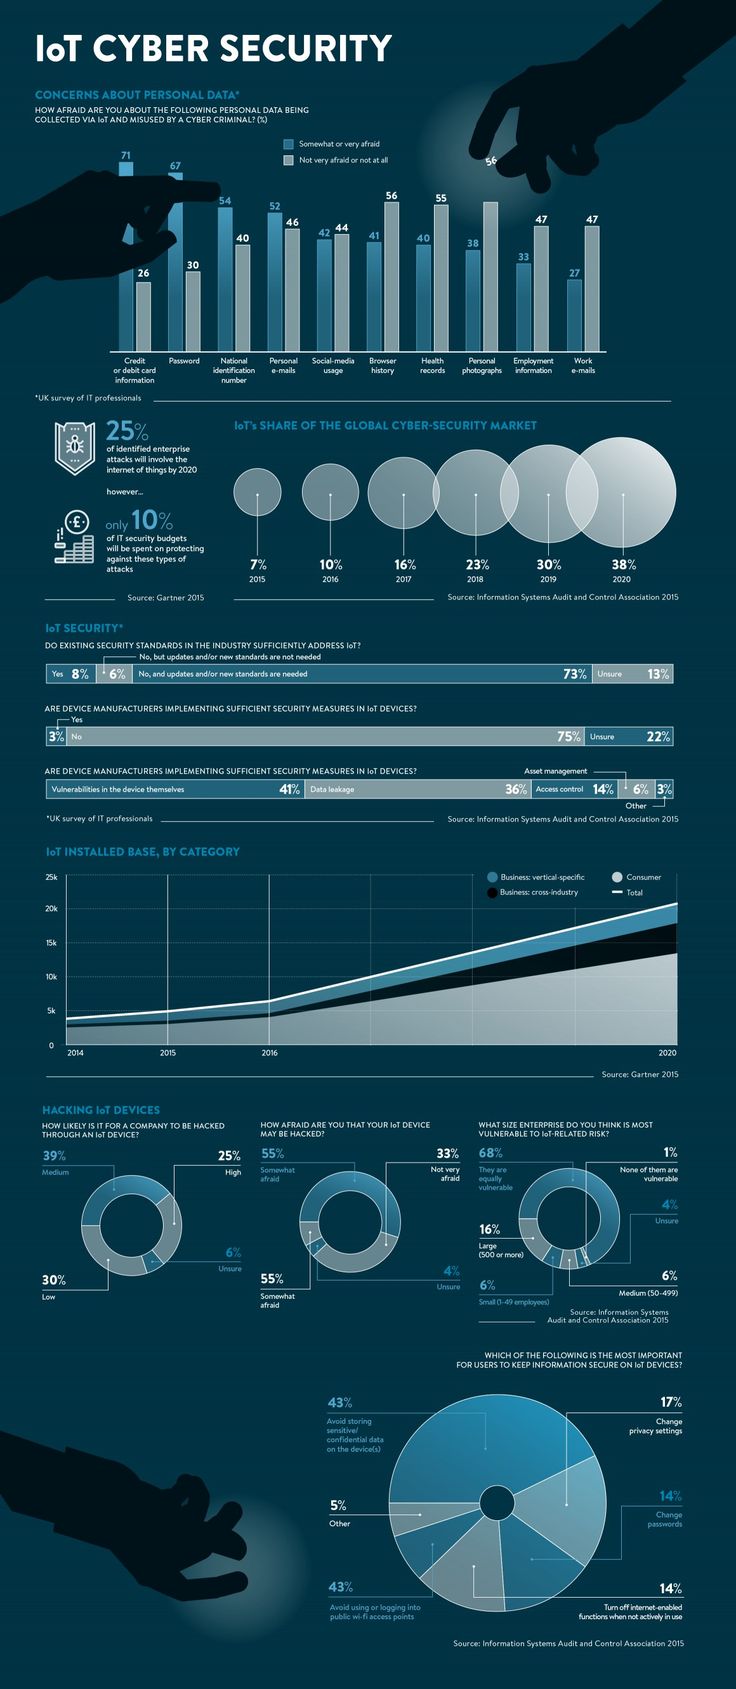 This infographic published in the Cyber Security Special Report highlights the s...